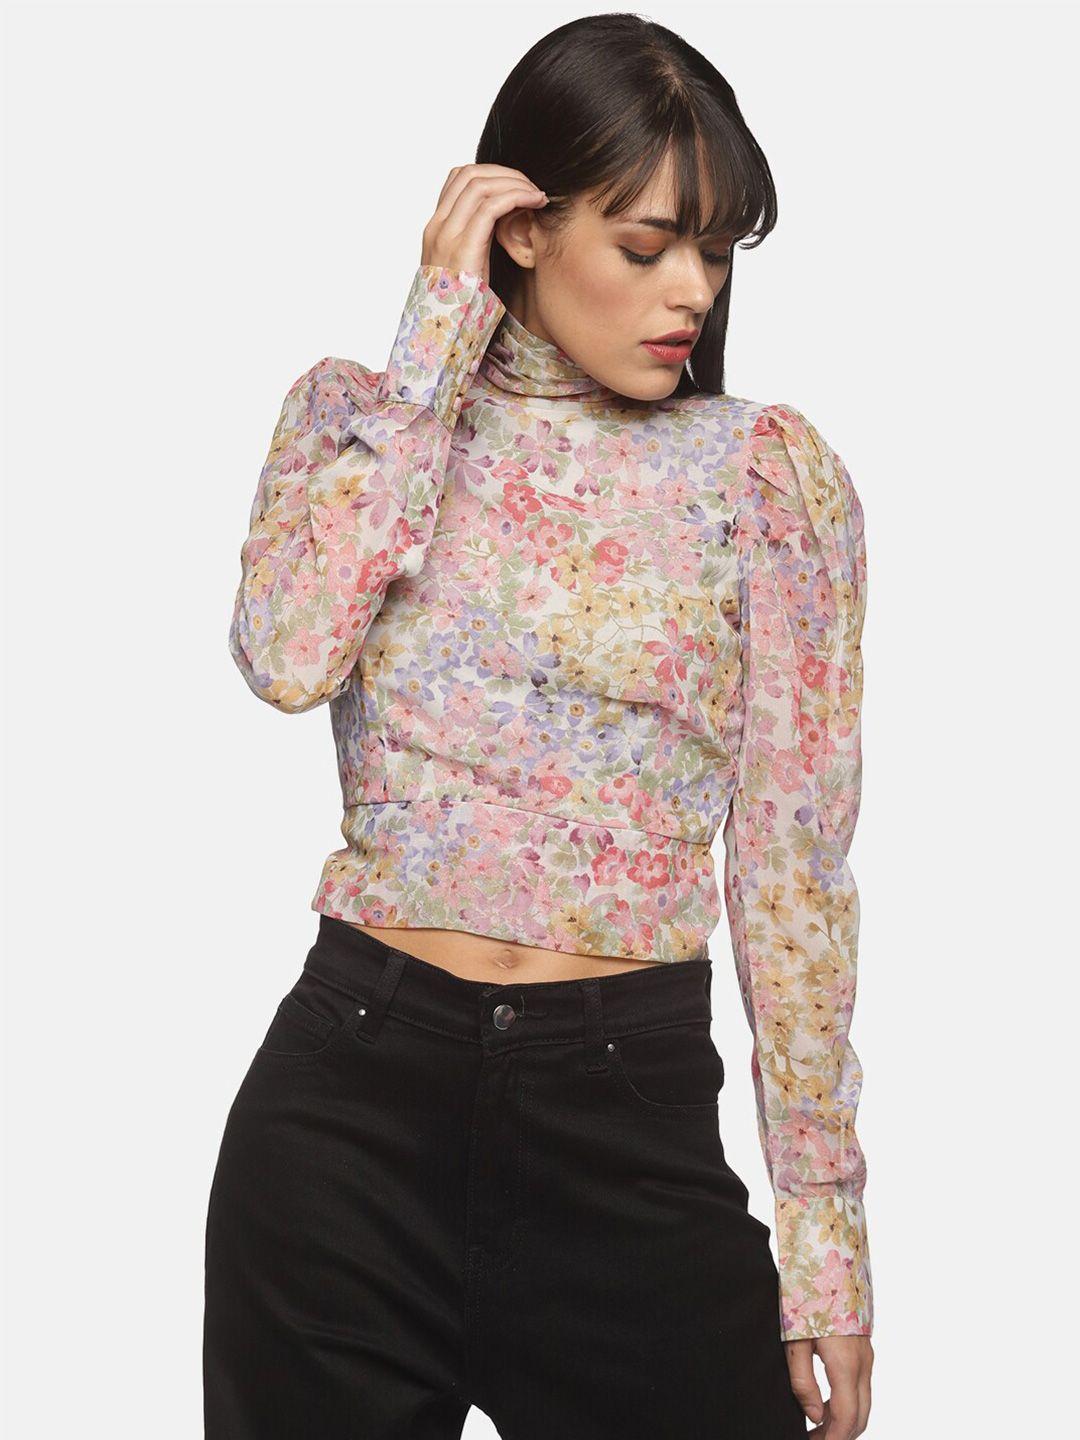 here&now beige & pink floral printed chiffon top